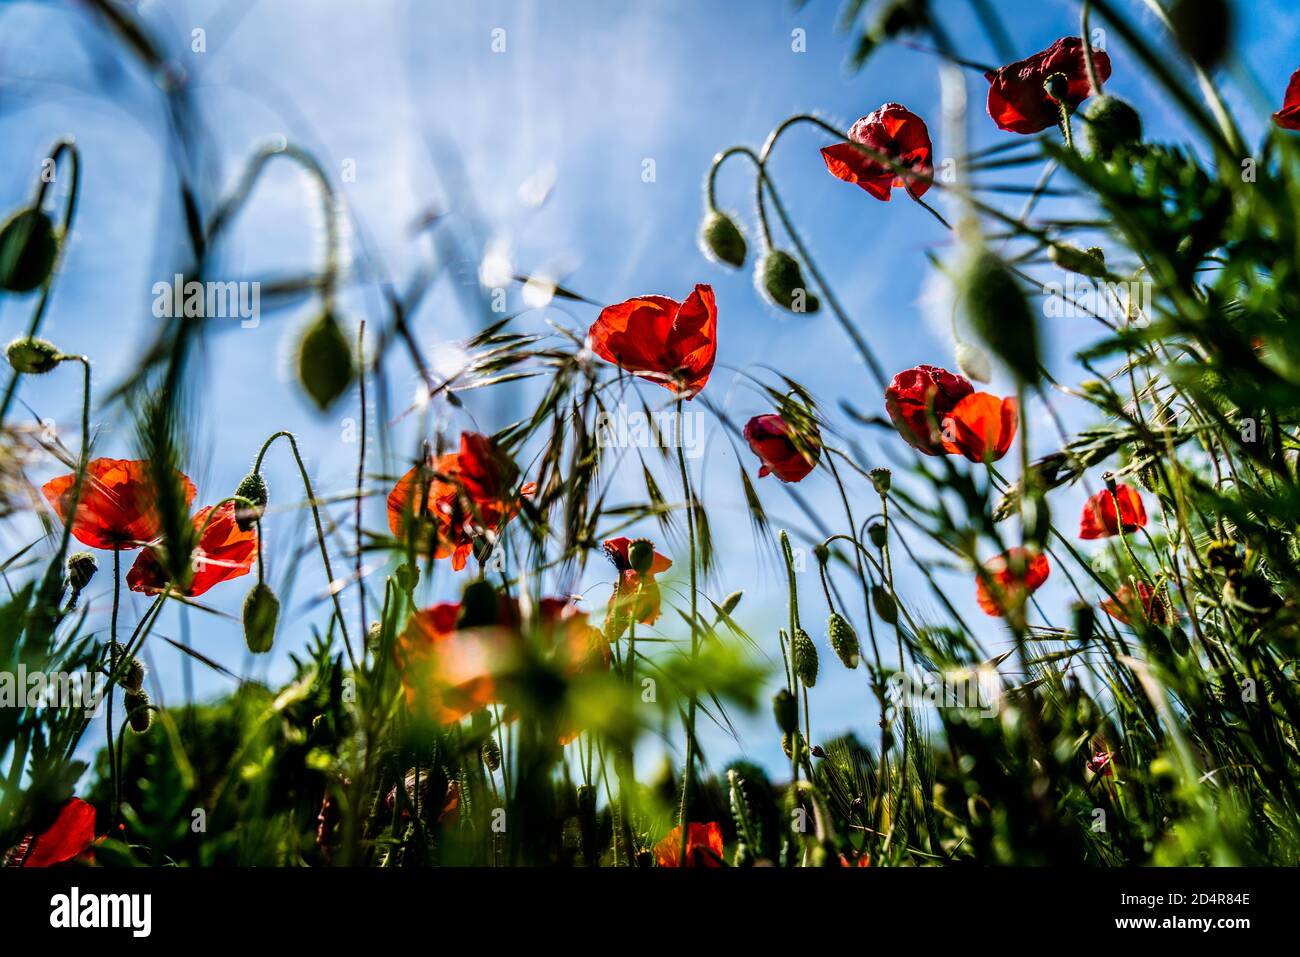 Poppies in a field of wheat. Stock Photo